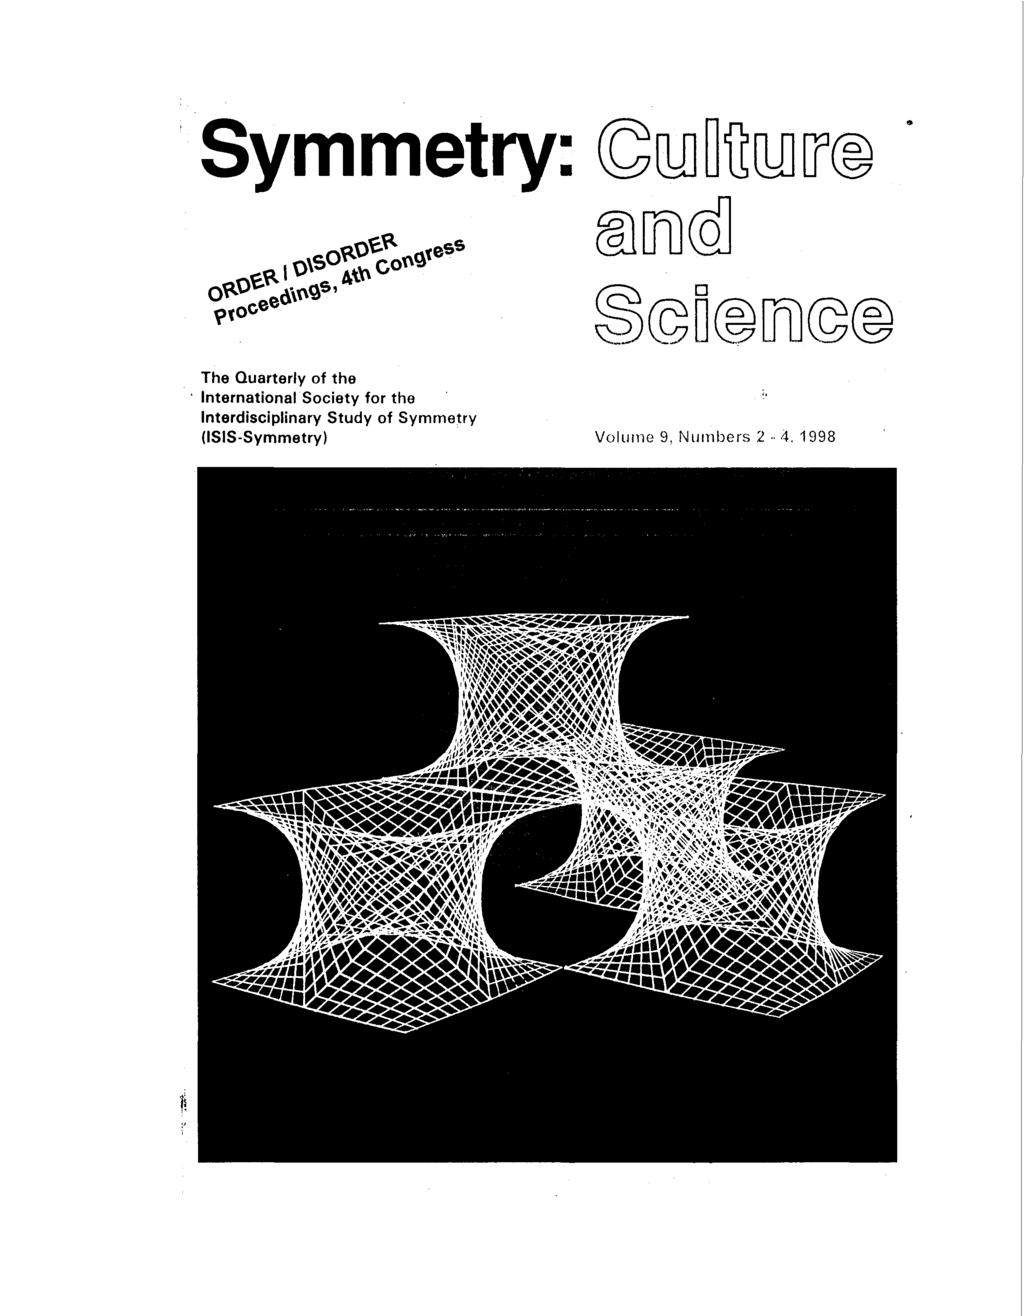 Symmetry: The Quarterly of the International Society for the